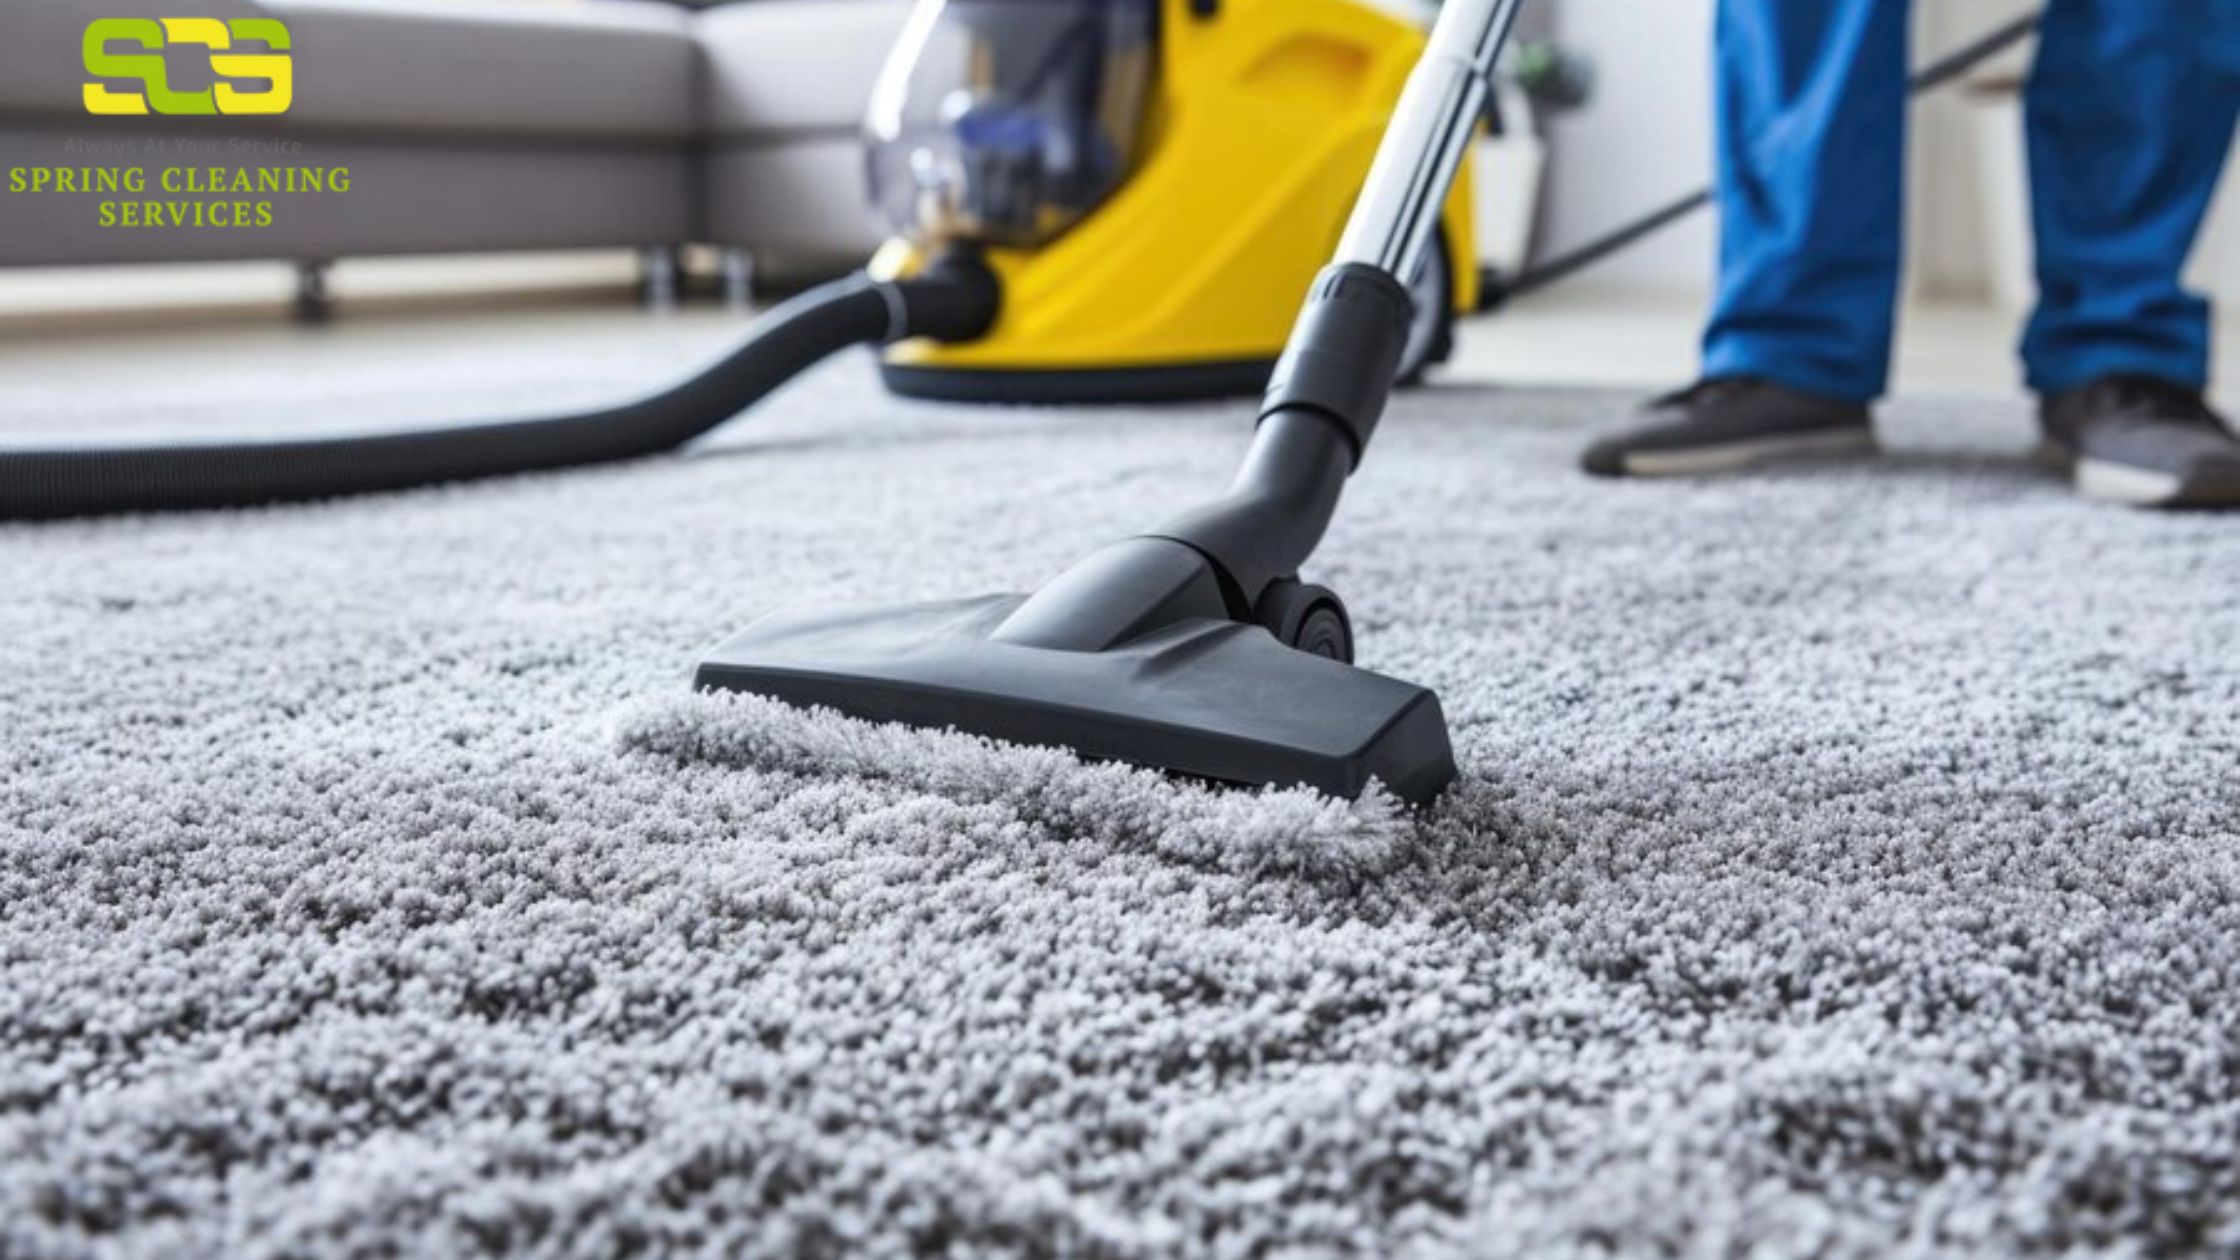 Benefits of Hiring Carpet Cleaning Services for Home Maintenance - Global Insights, One Guest Post at a Time